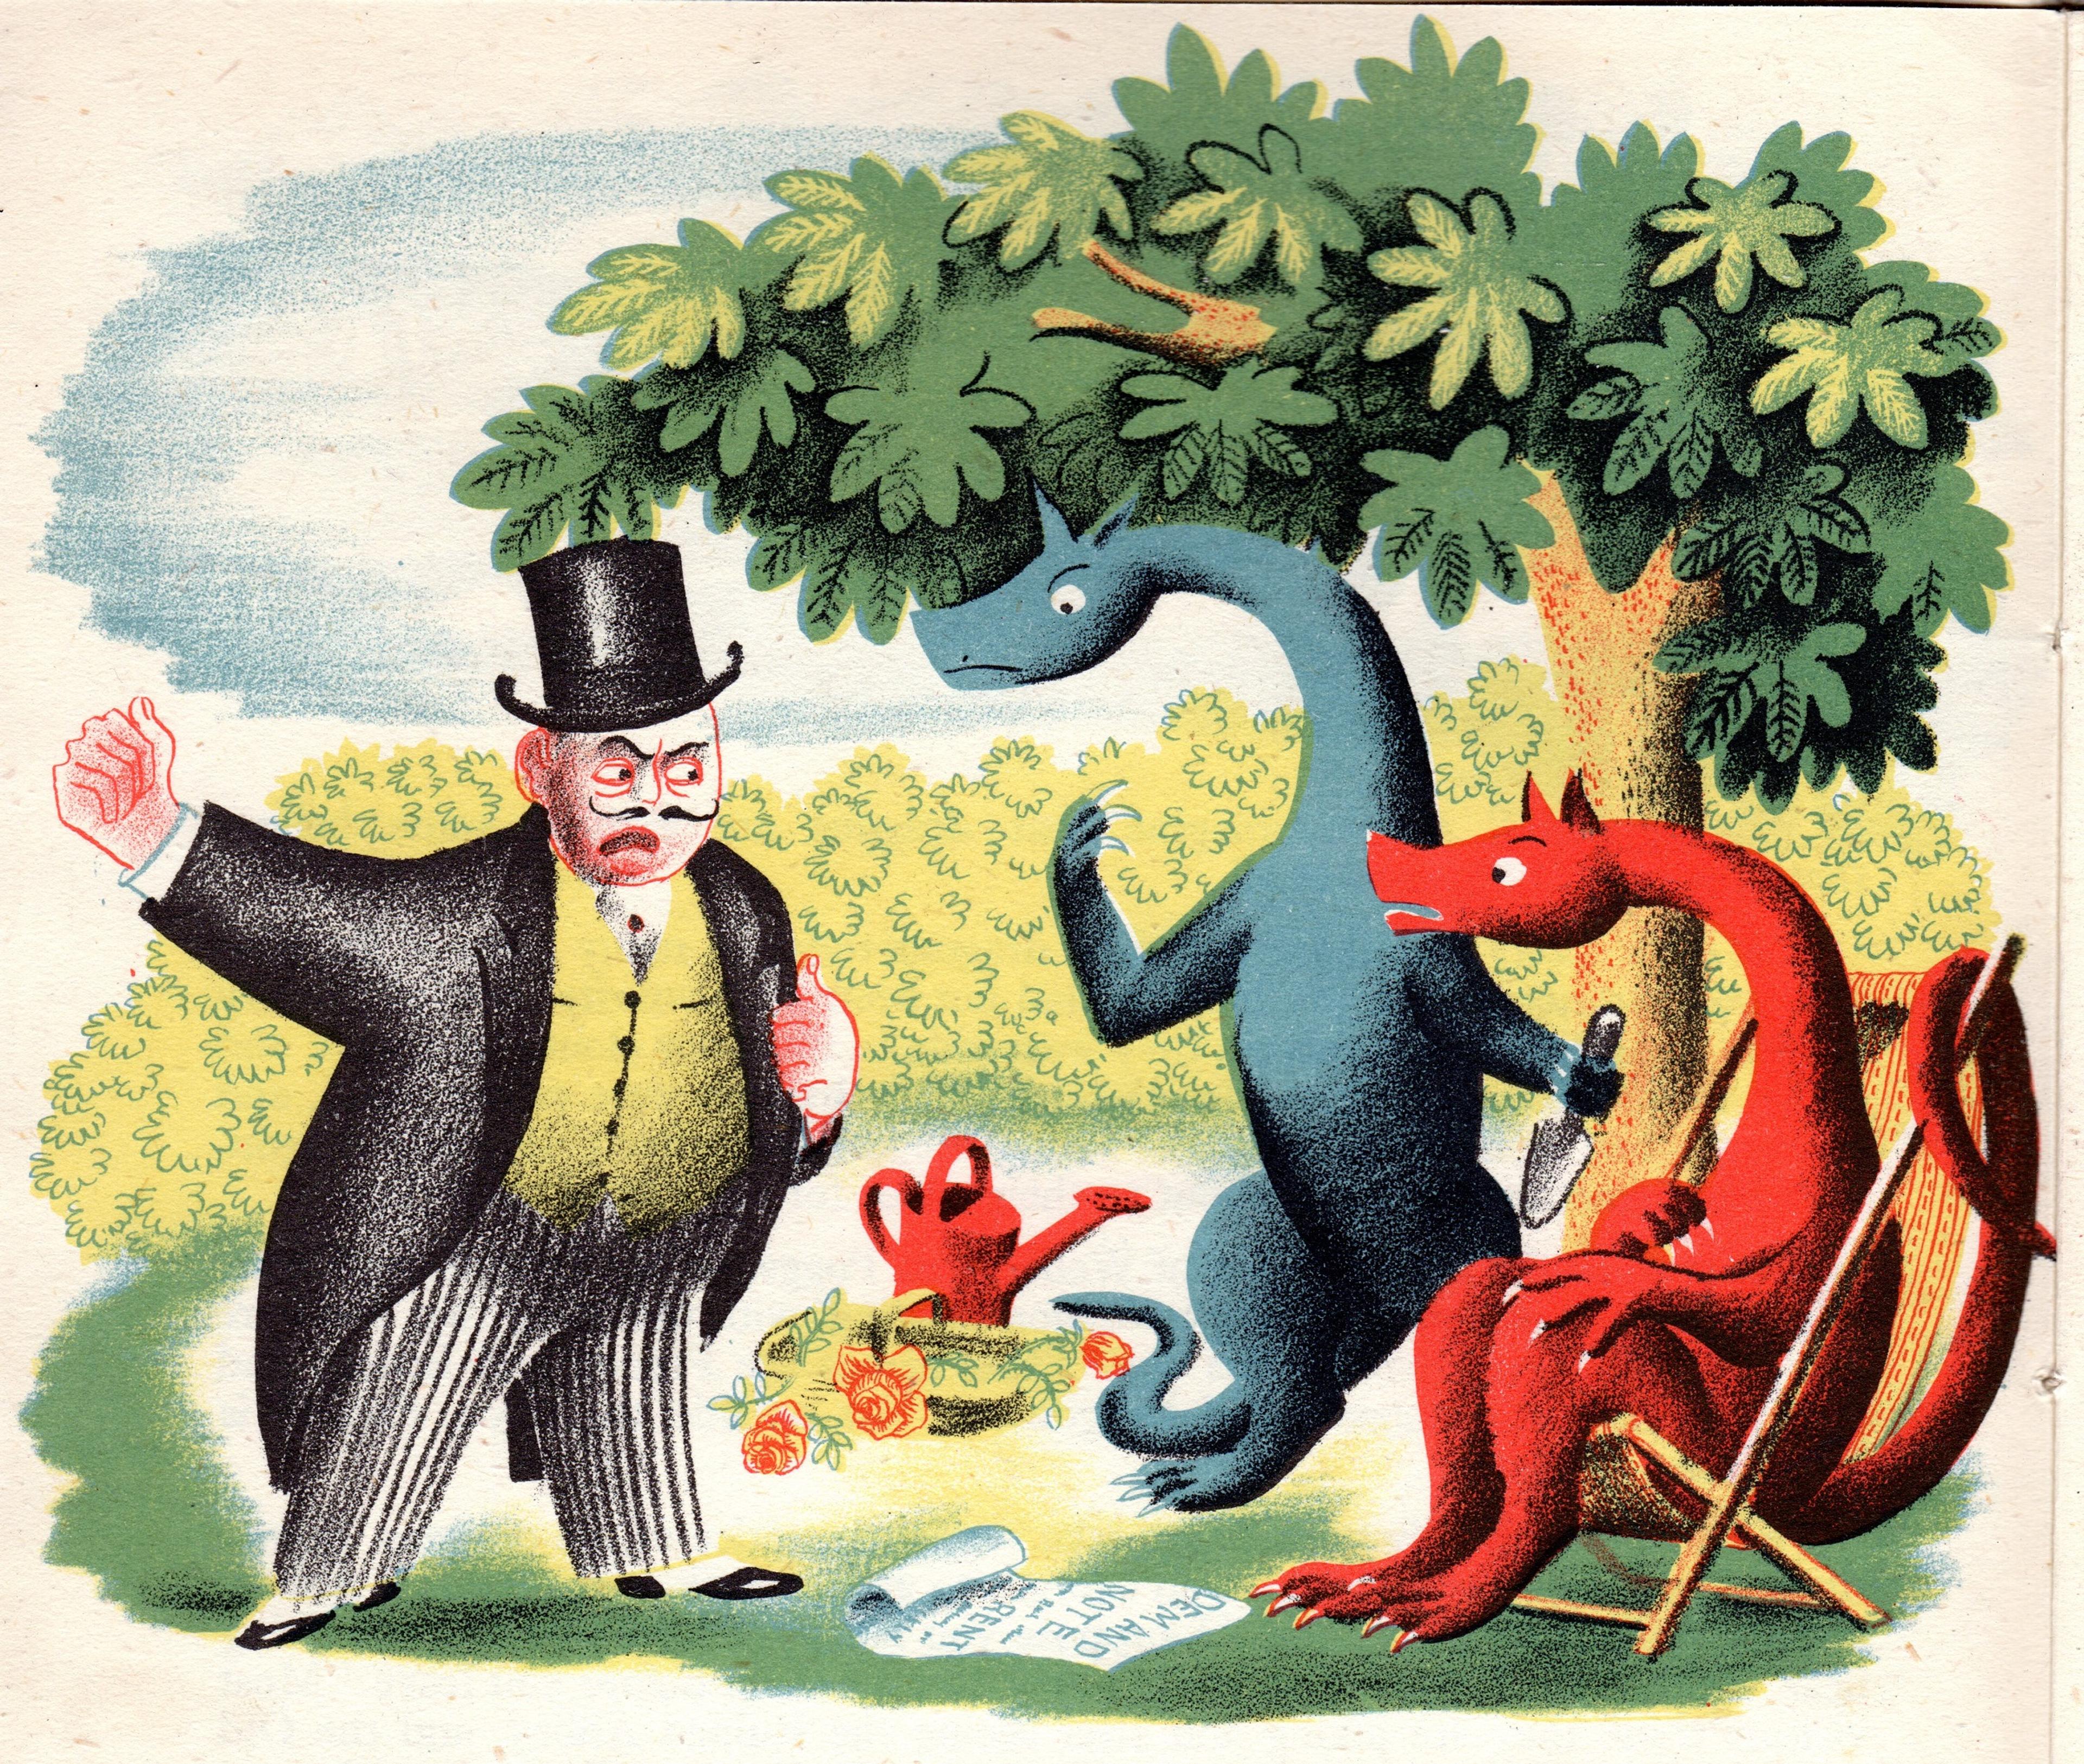 Illustration of man in top hat shouting at two dragons